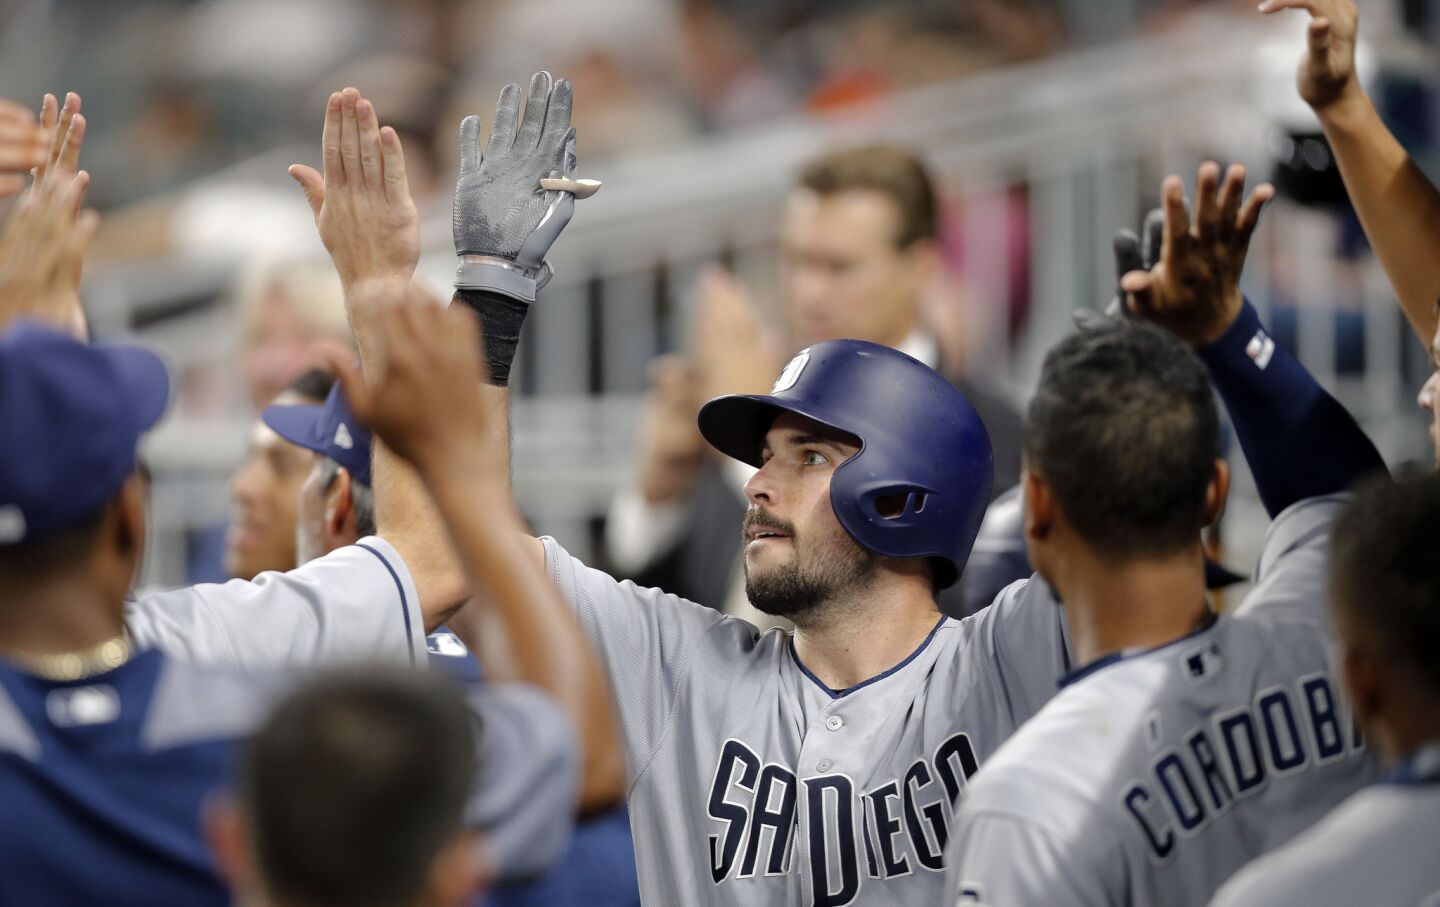 After an 0-for-24 start, C Austin Hedges is 6-for-15 with two homers, two doubles and three RBIs. 3B Ryan Schimpf also has two homers over his five games, as well as six walks against four strikeouts, while 1B Wil Myers is 7-for-20 over his last five games.